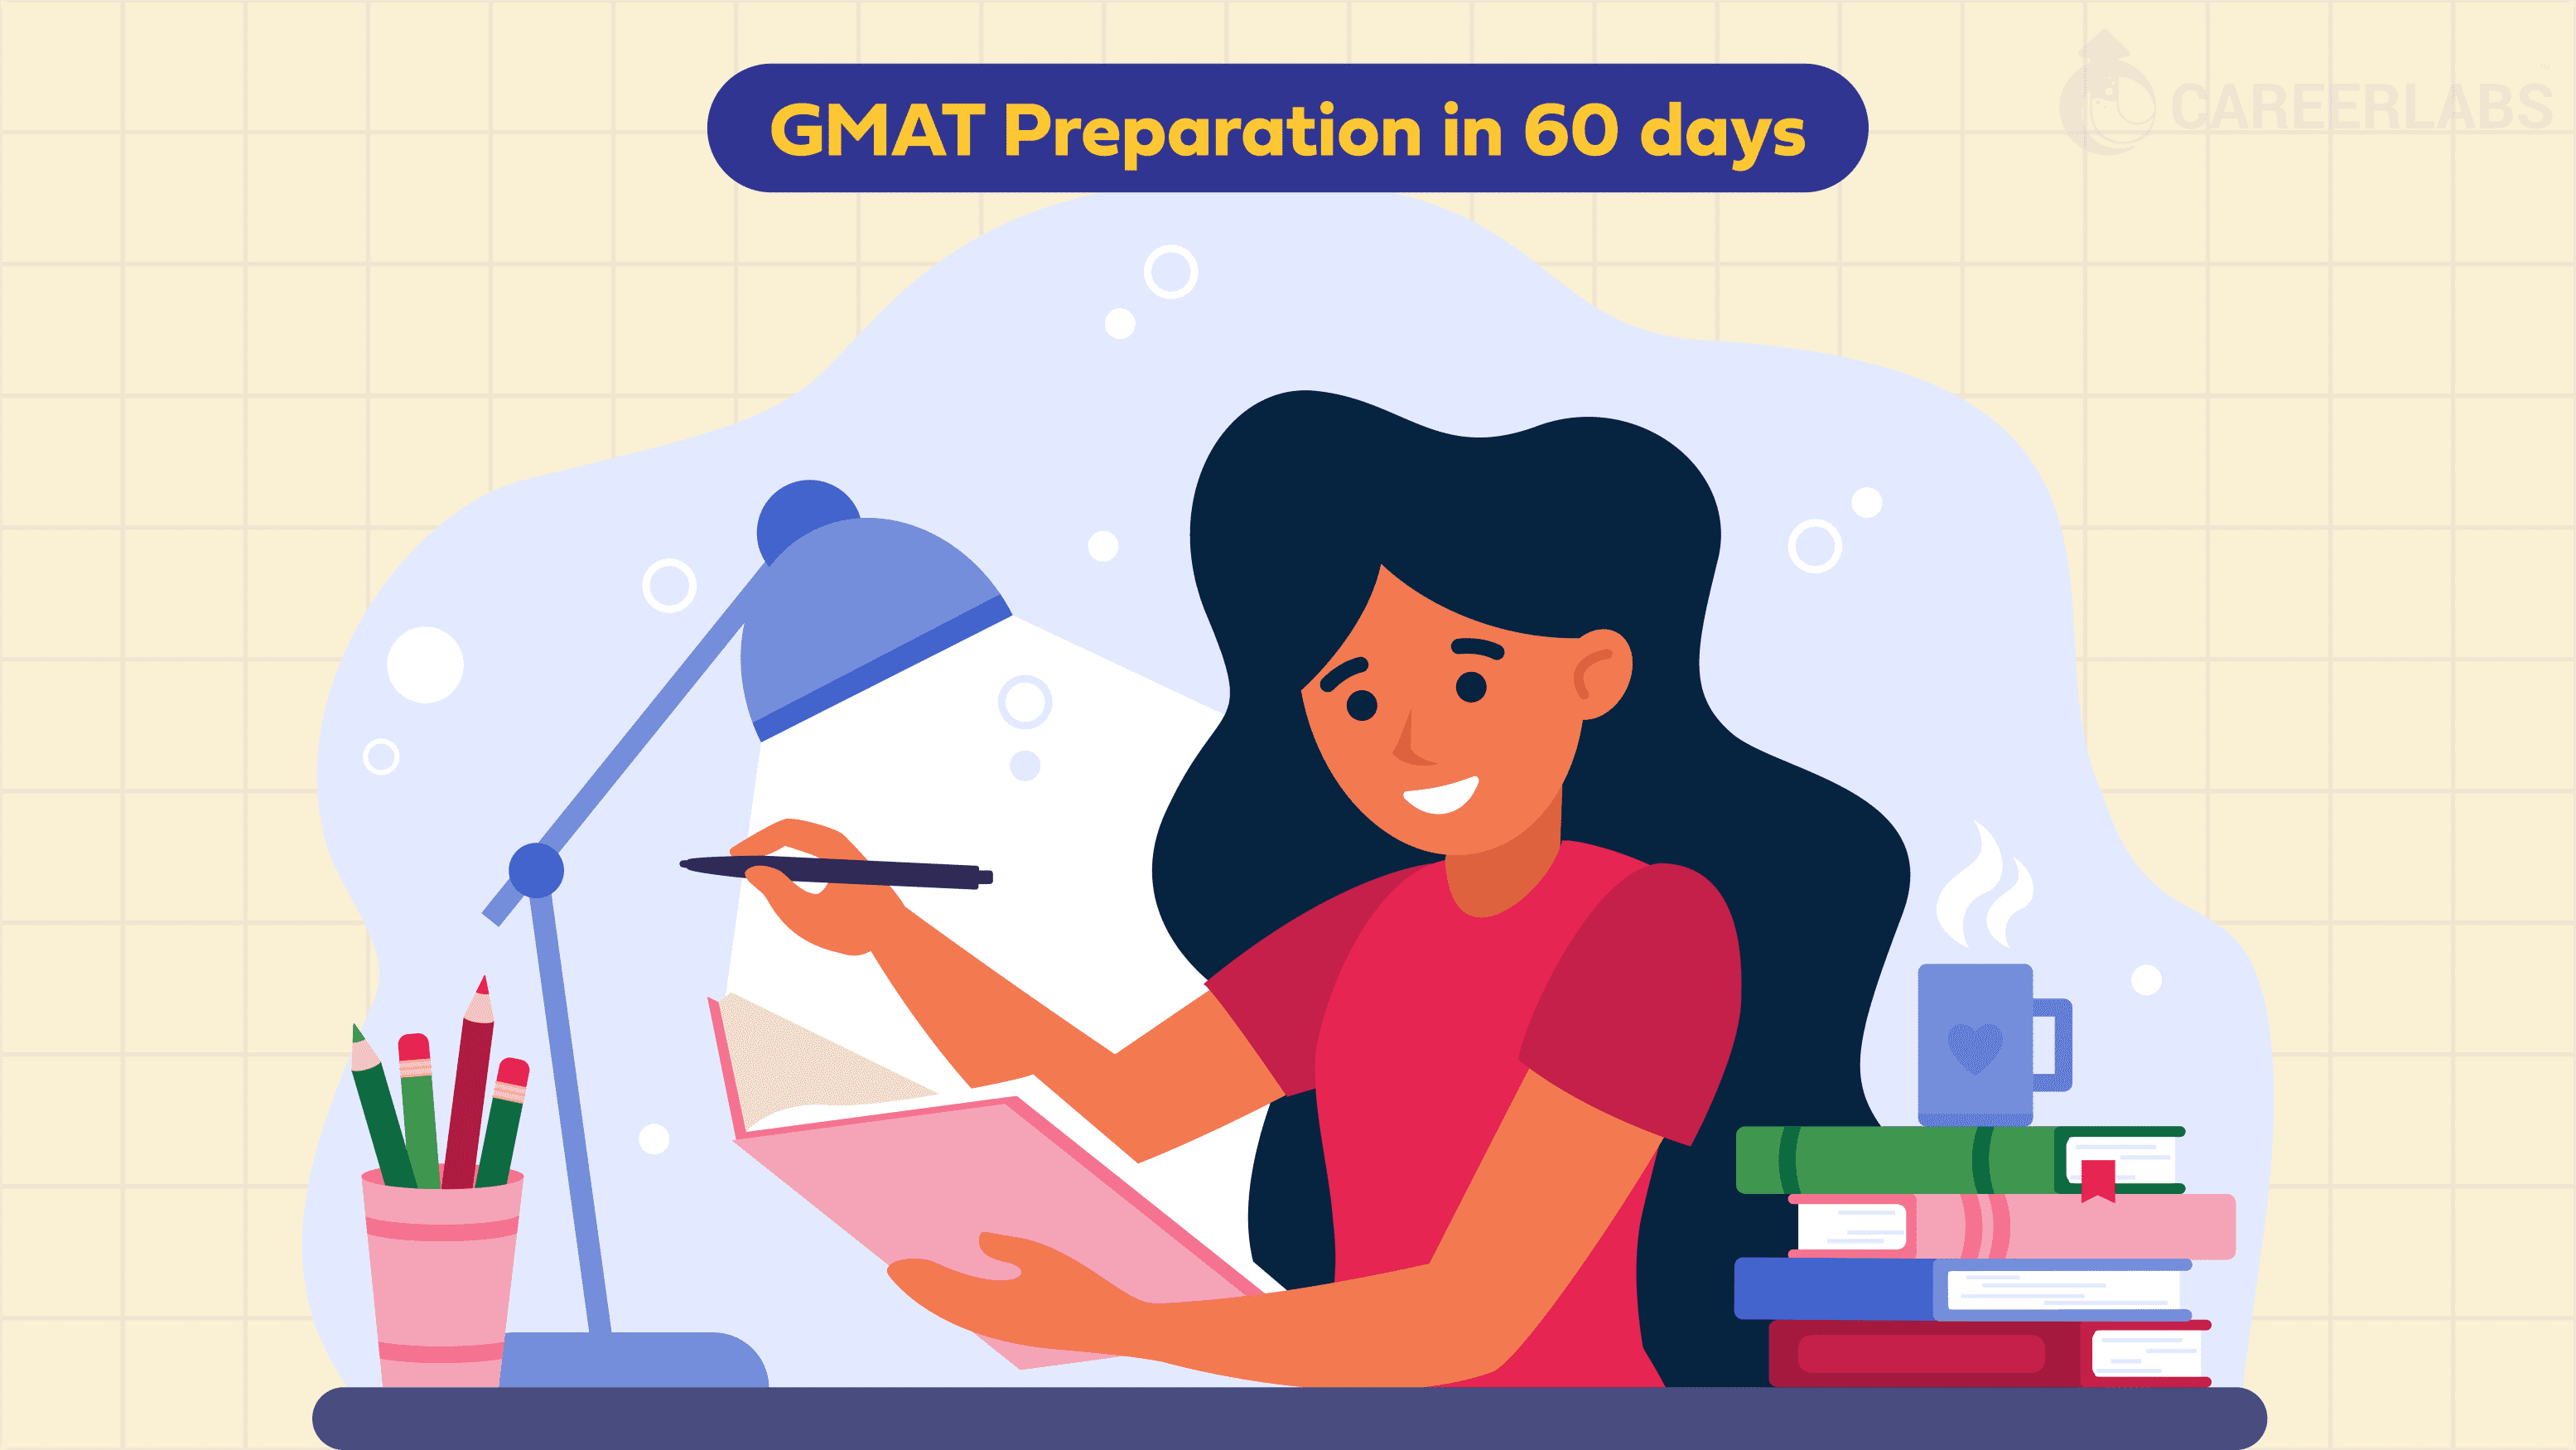 How to Prepare for GMAT in 60 days?